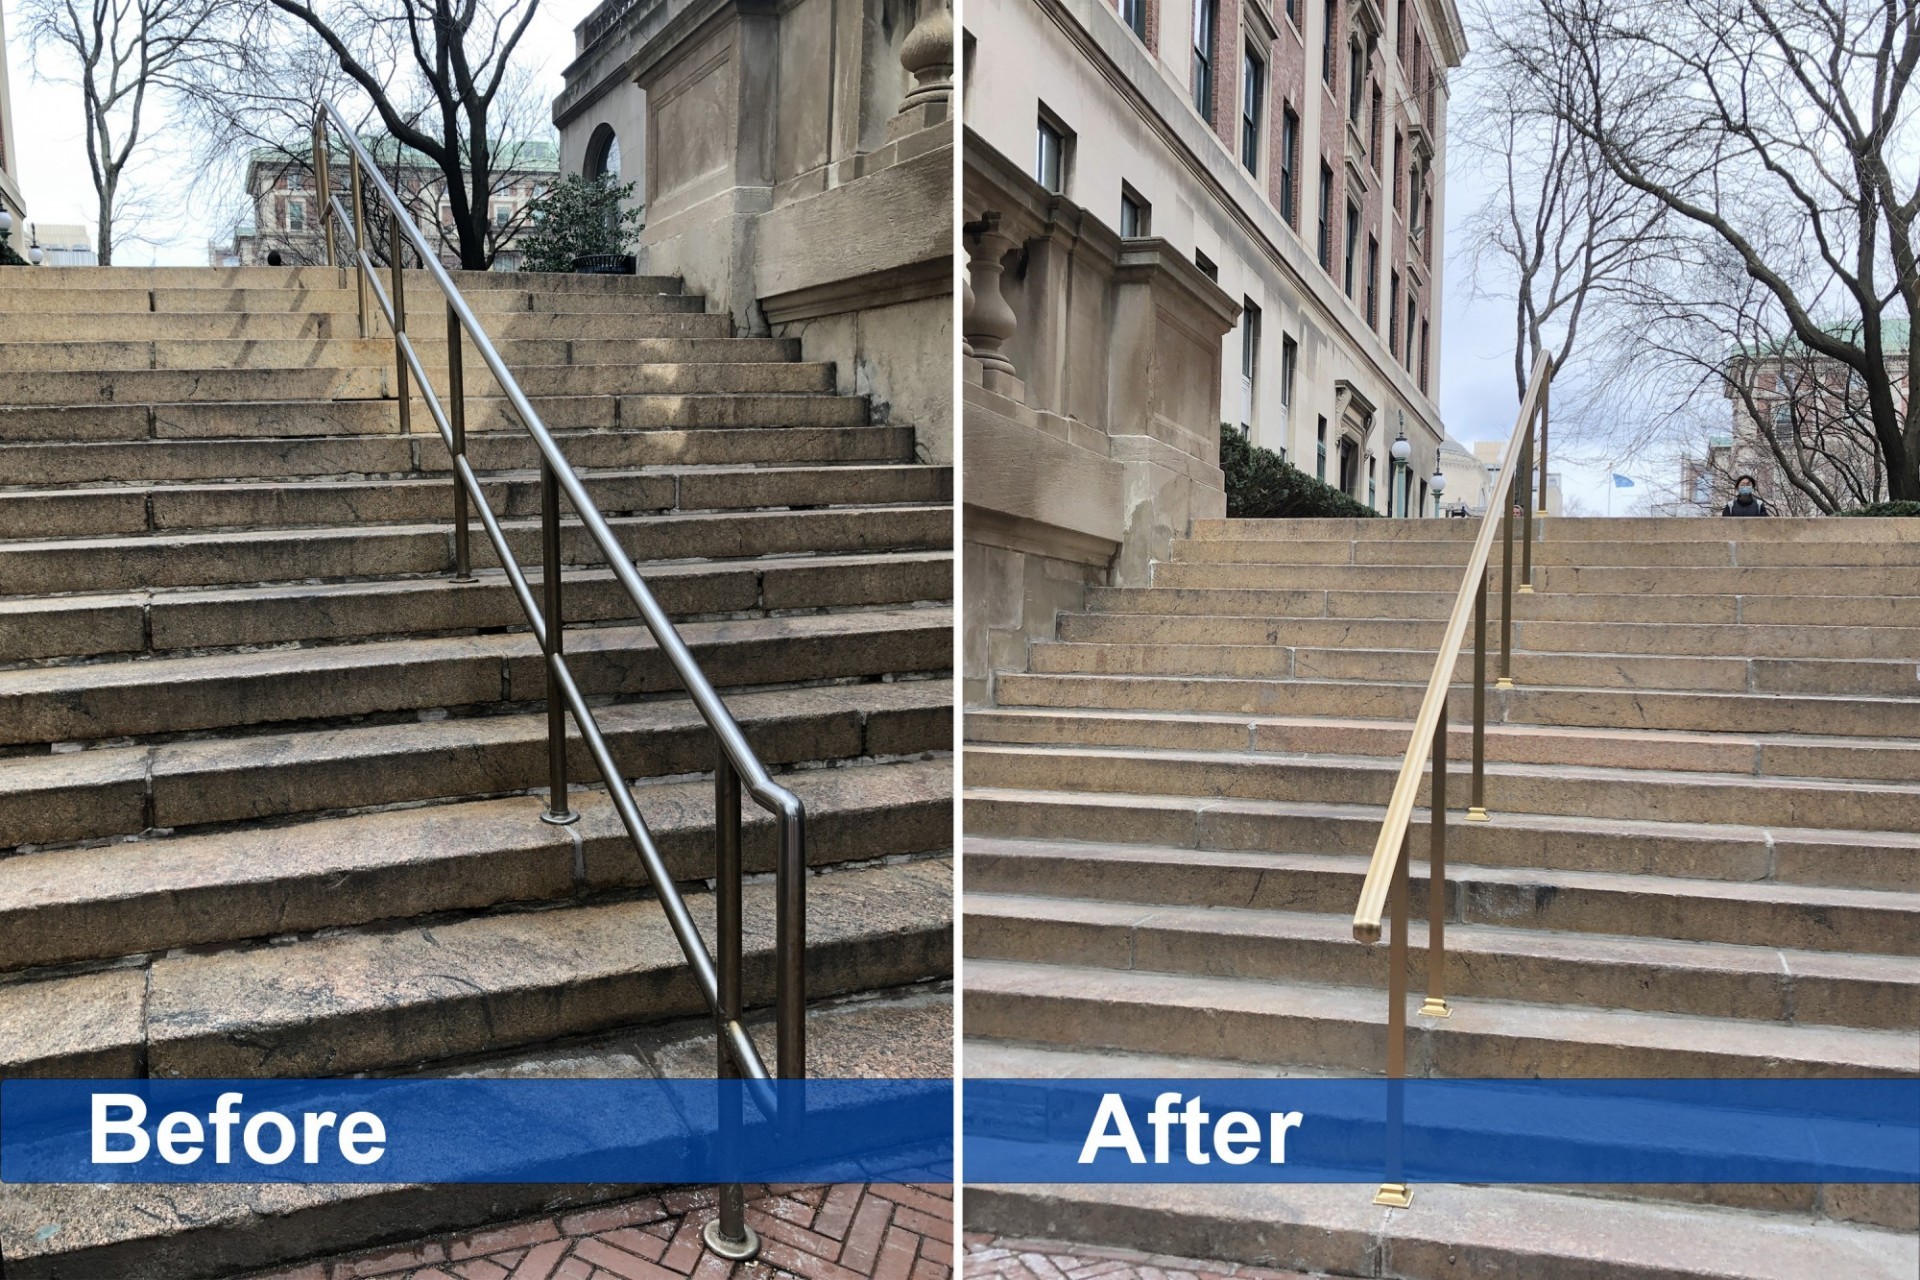 A before and after comparison of the granite steps at the 114th Street entrance, showing even, polished granite steps and a new brass handrail.